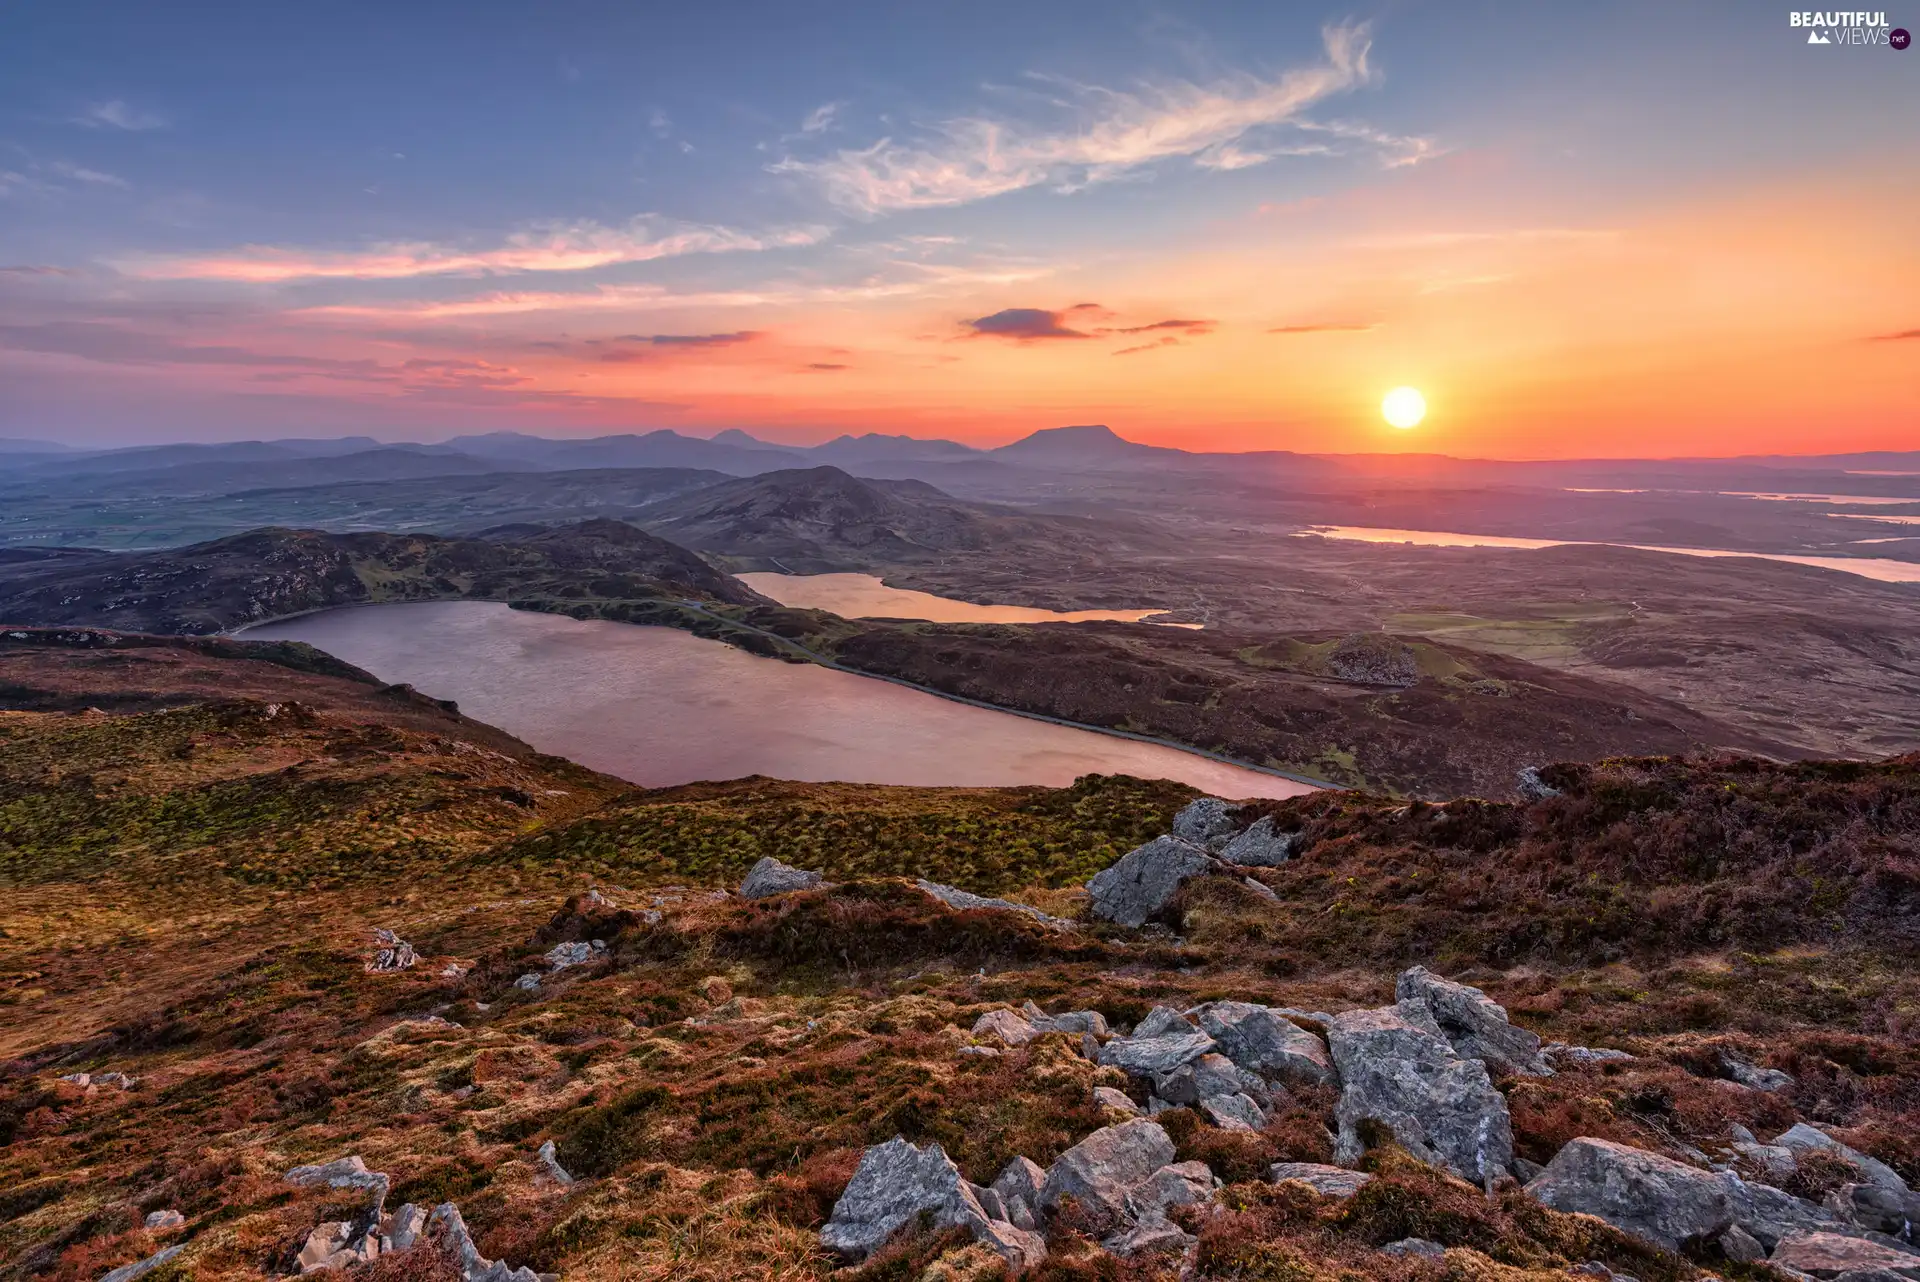 Derryveagh Mountains, Lough Greenan Lake, Ireland, Great Sunsets, County Donegal, Lough Salt Lake